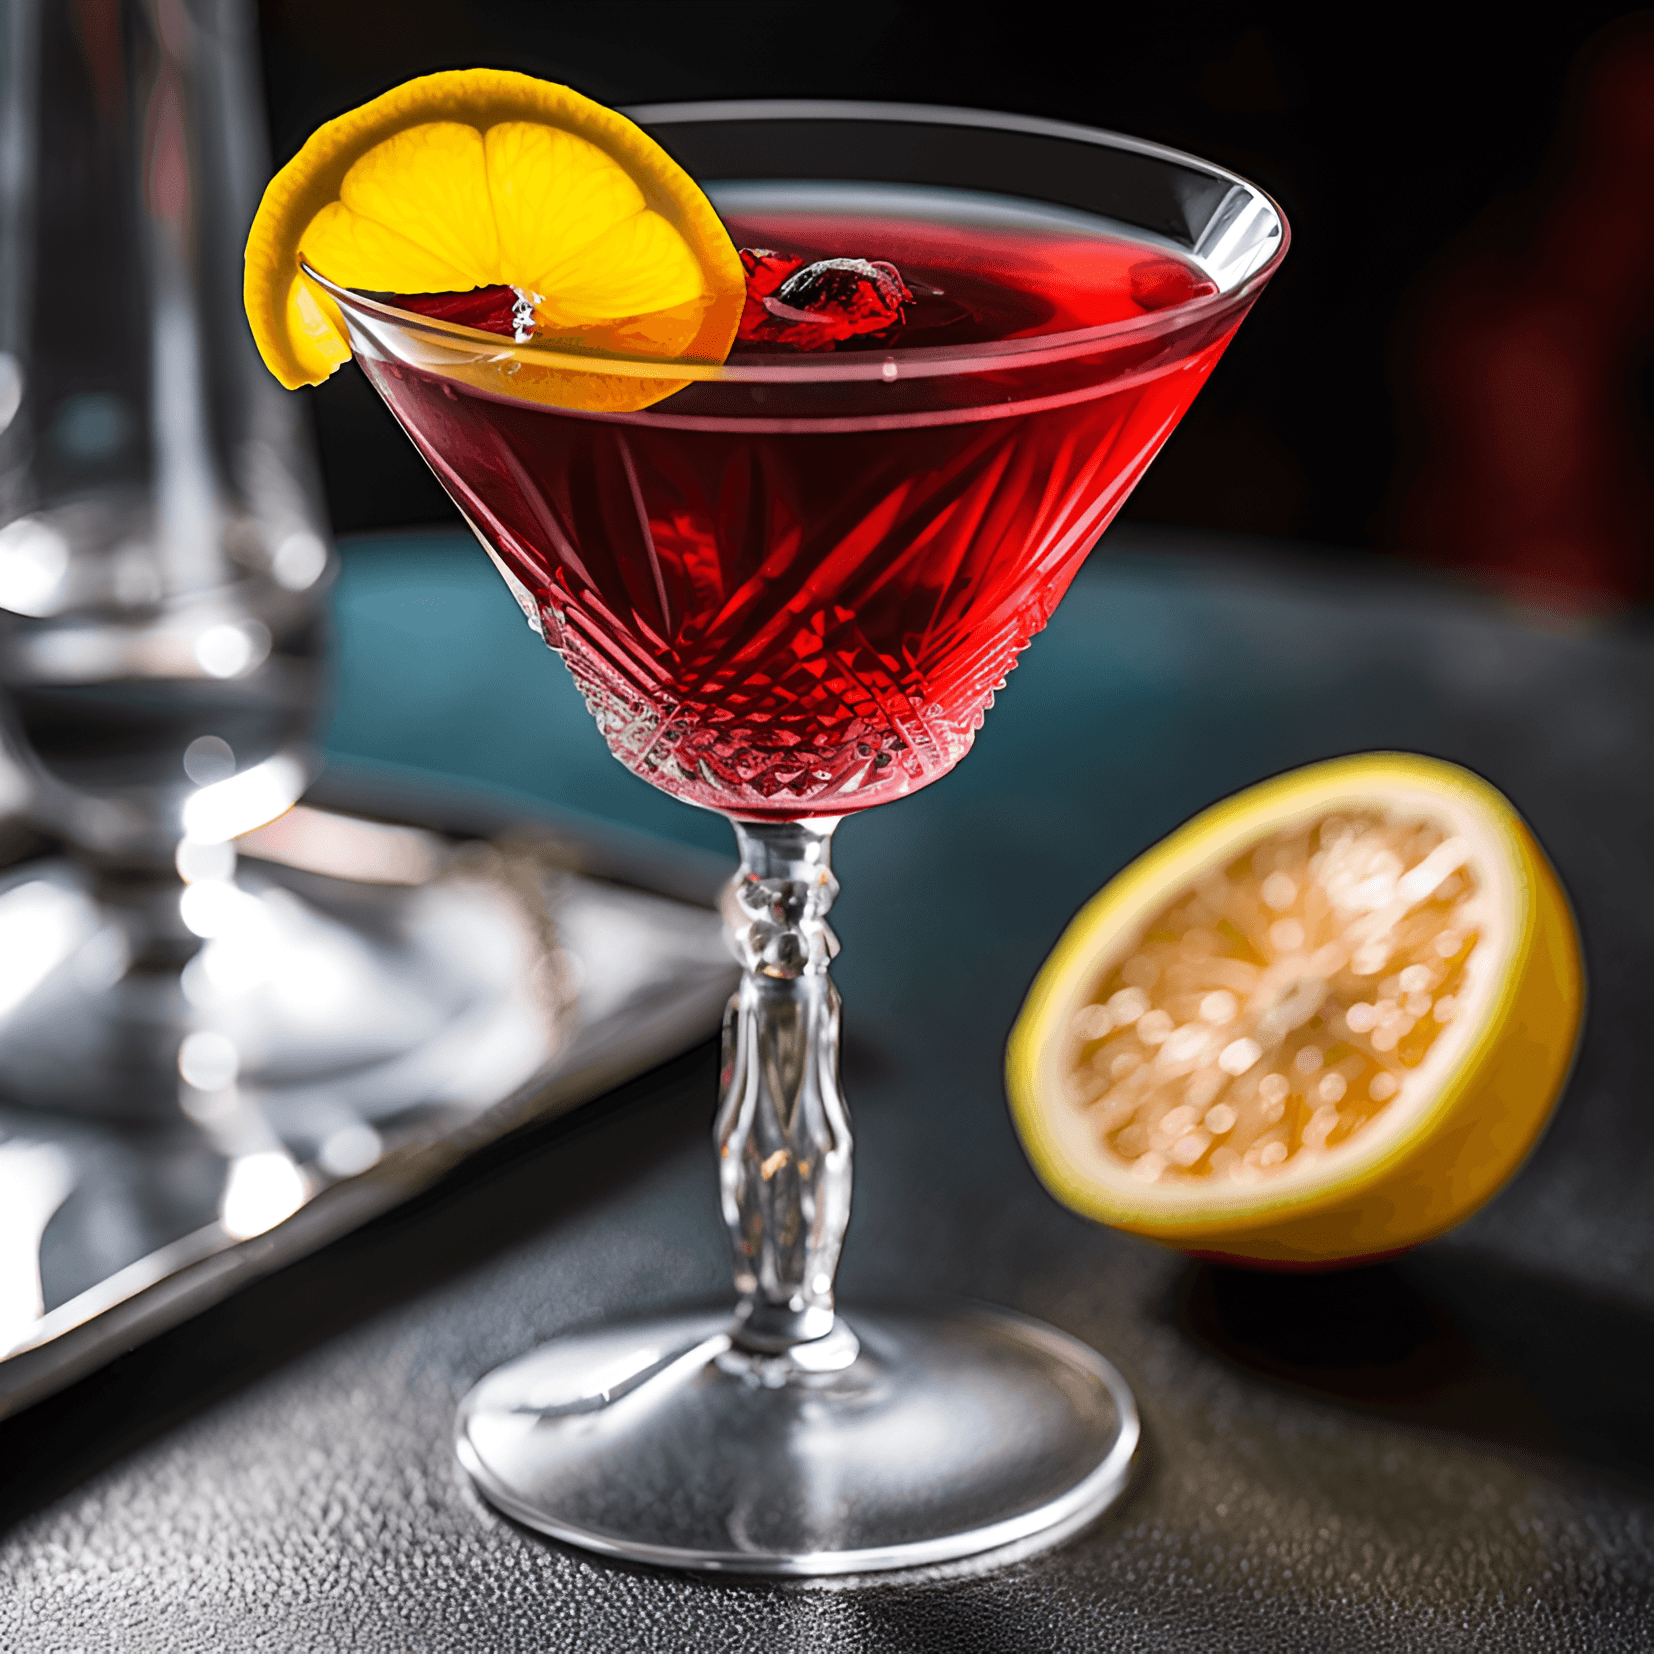 Vermouth Cassis Cocktail Recipe - The Vermouth Cassis cocktail has a complex flavor profile that is both sweet and herbal. The vermouth adds a slightly bitter and aromatic taste, while the cassis provides a fruity and sweet counterbalance. The result is a well-rounded and refreshing cocktail that is both strong and light.